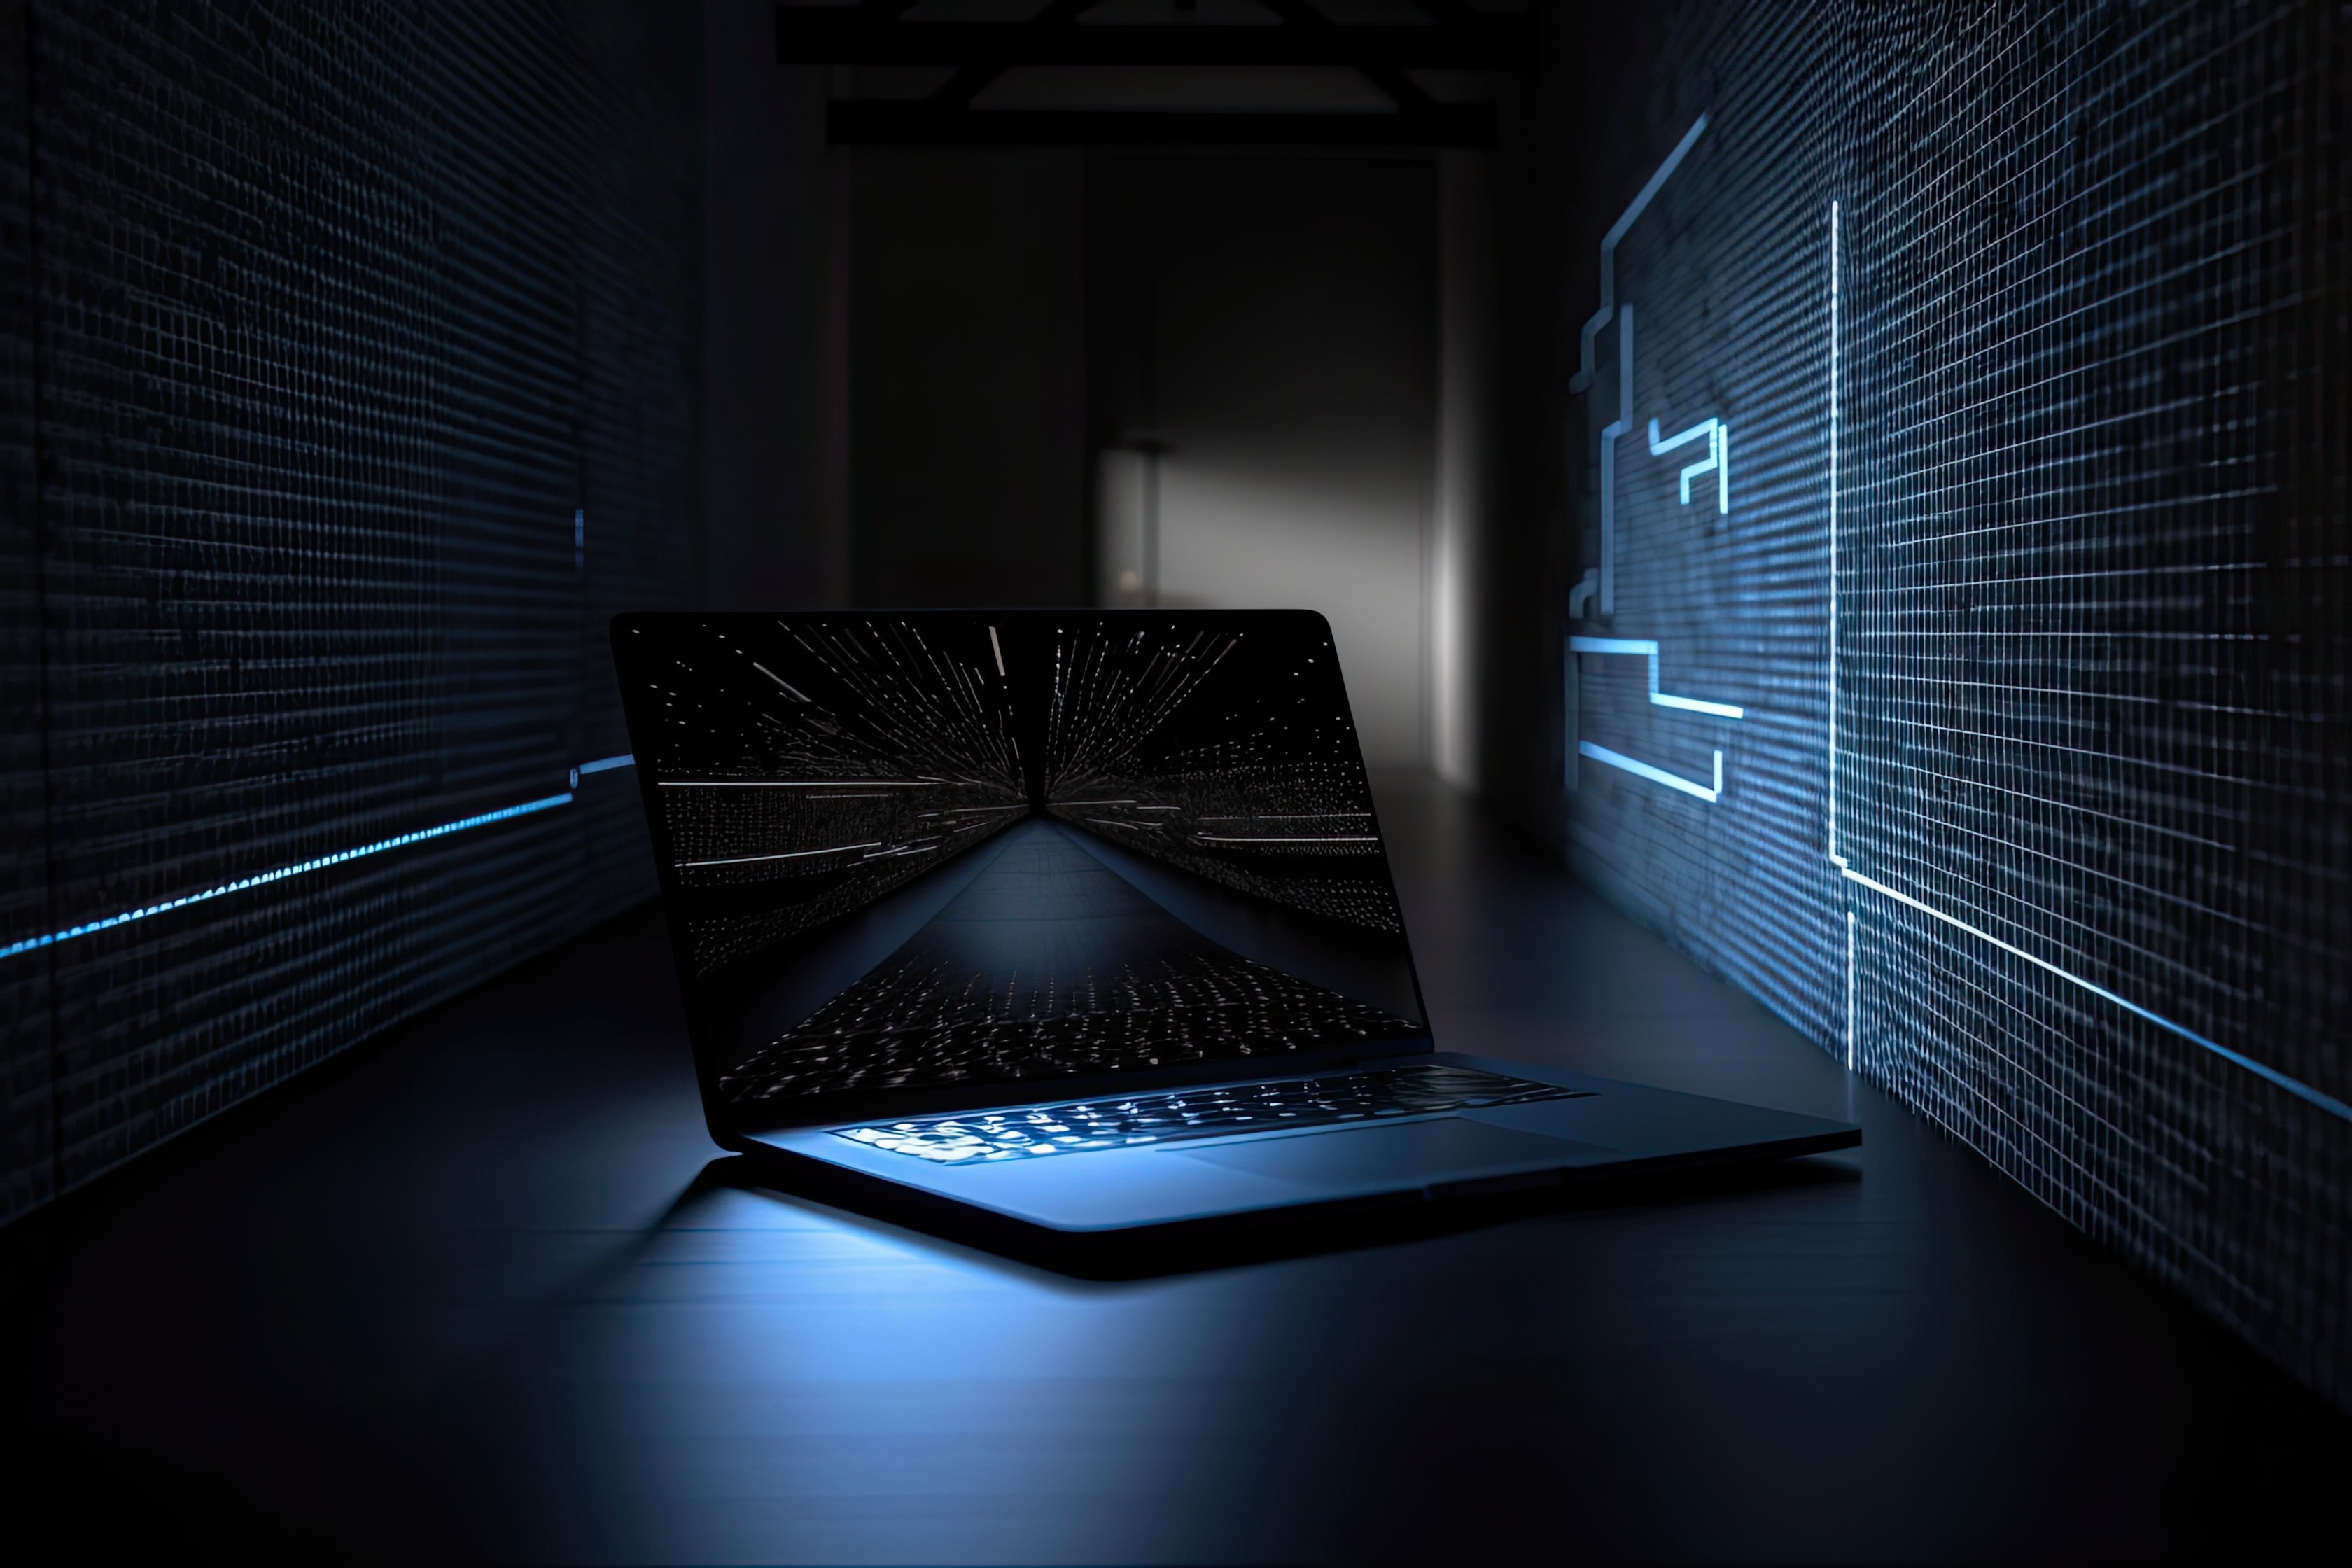 In a dark room with only one light source, an 8K isolated laptop with an abstract screen display is seen (middle). Generative AI